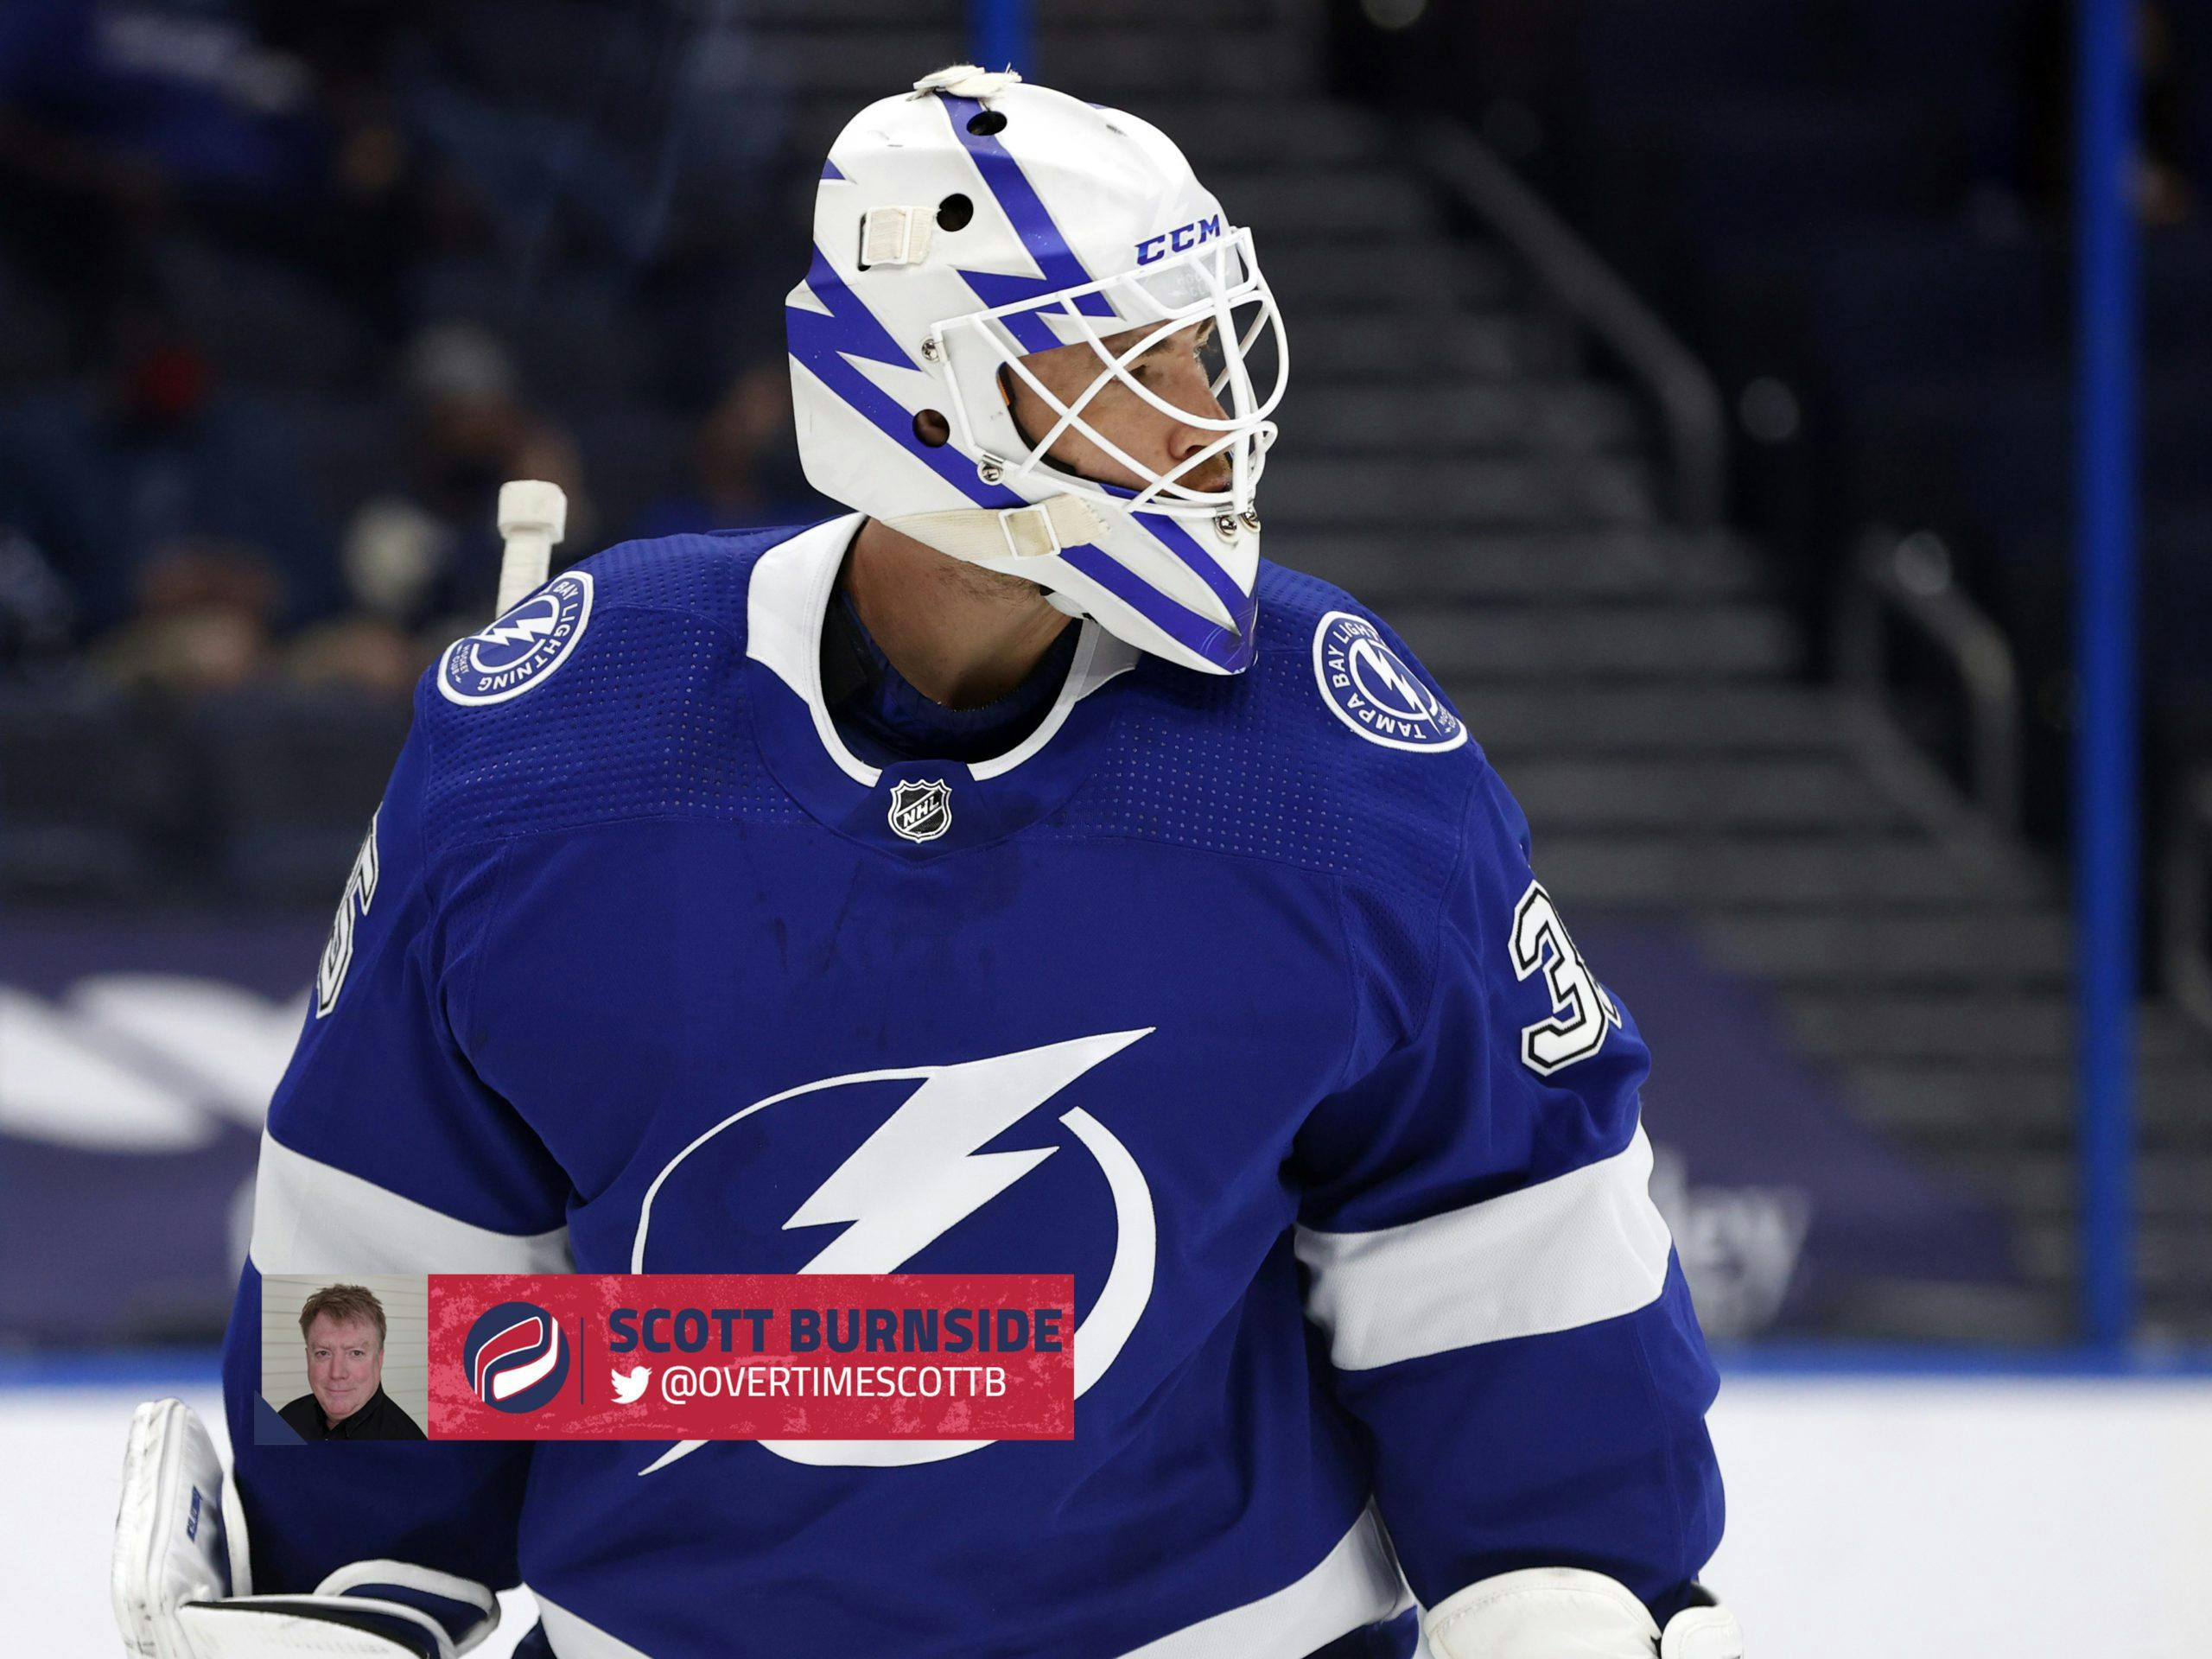 Are the Lightning actually vibing with their new reverse retro jerseys?